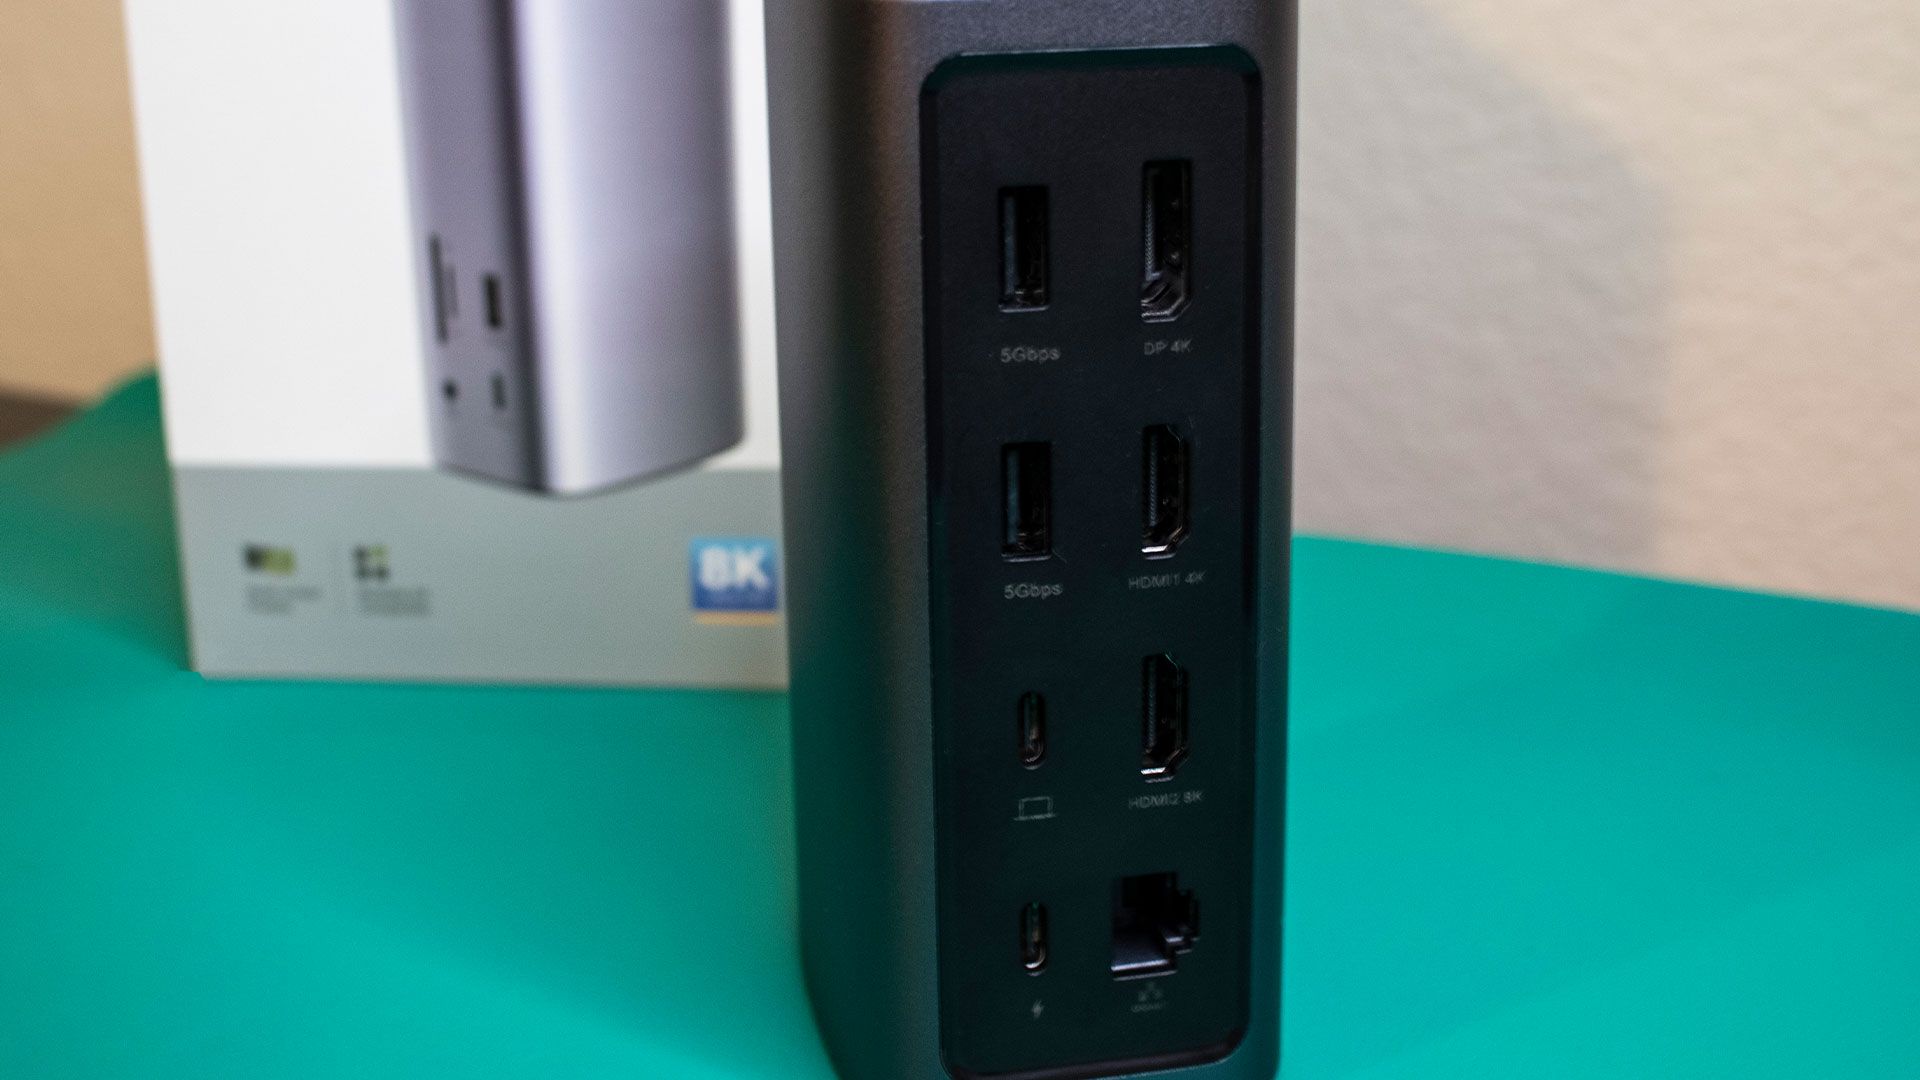 Rear of UGREEN USB-C docking station showing HDMI, USB, and Ethernet ports